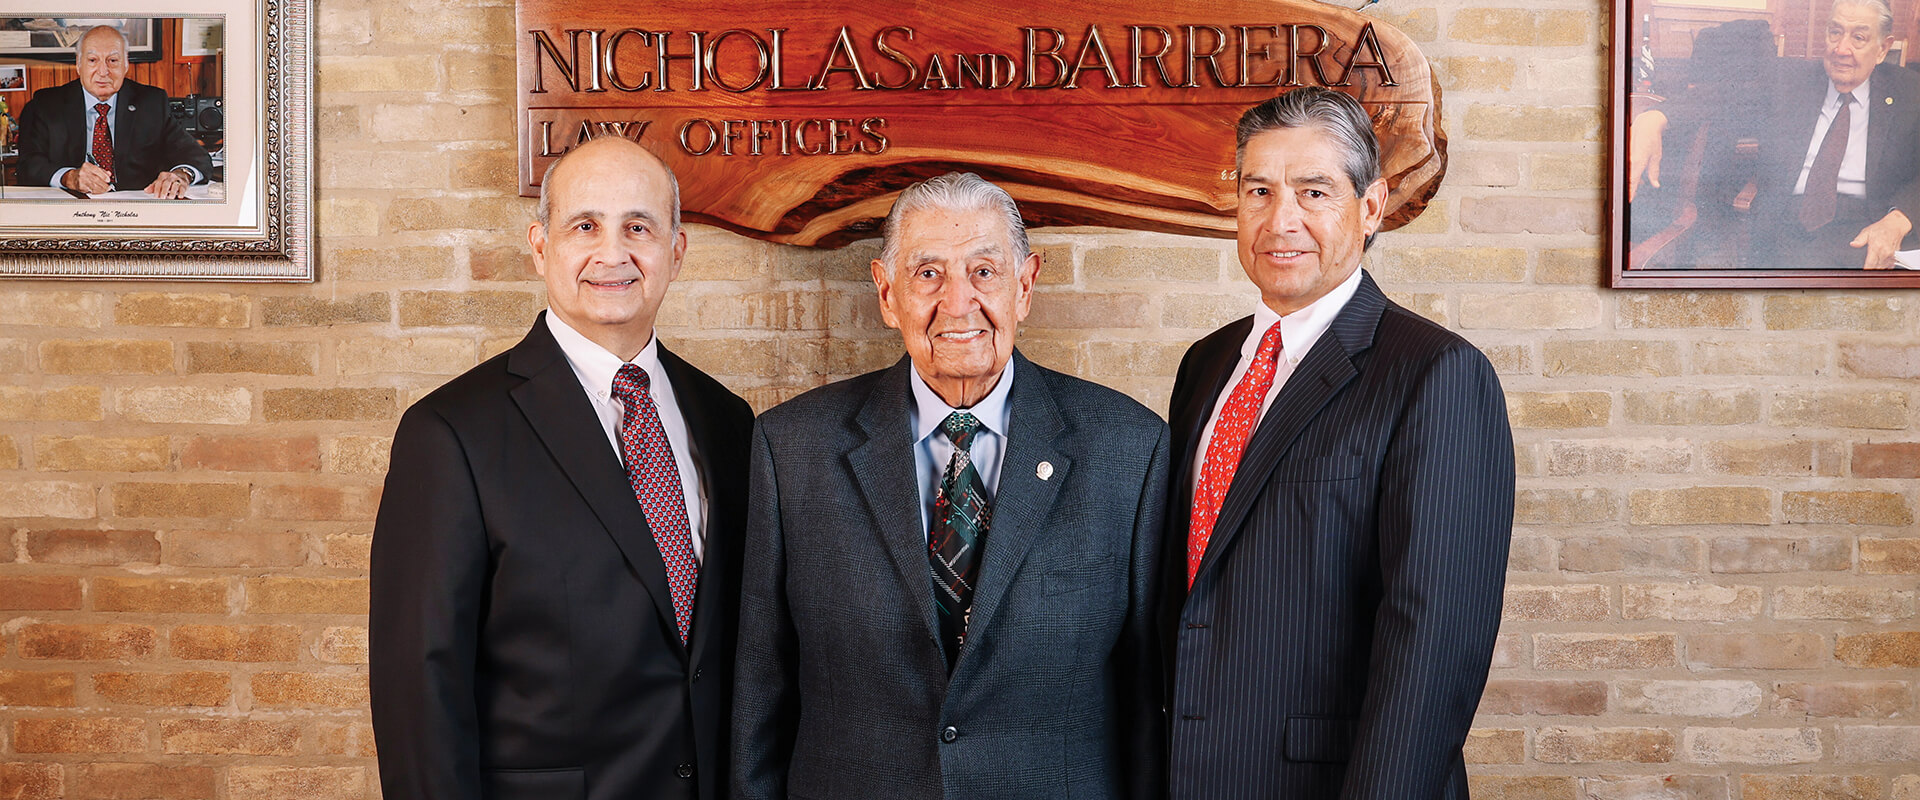 Roy Barrera Sr., center, is surrounded by his son, Roy Barrera Jr., right, and nephew, Gilbert C. Barrera Jr.